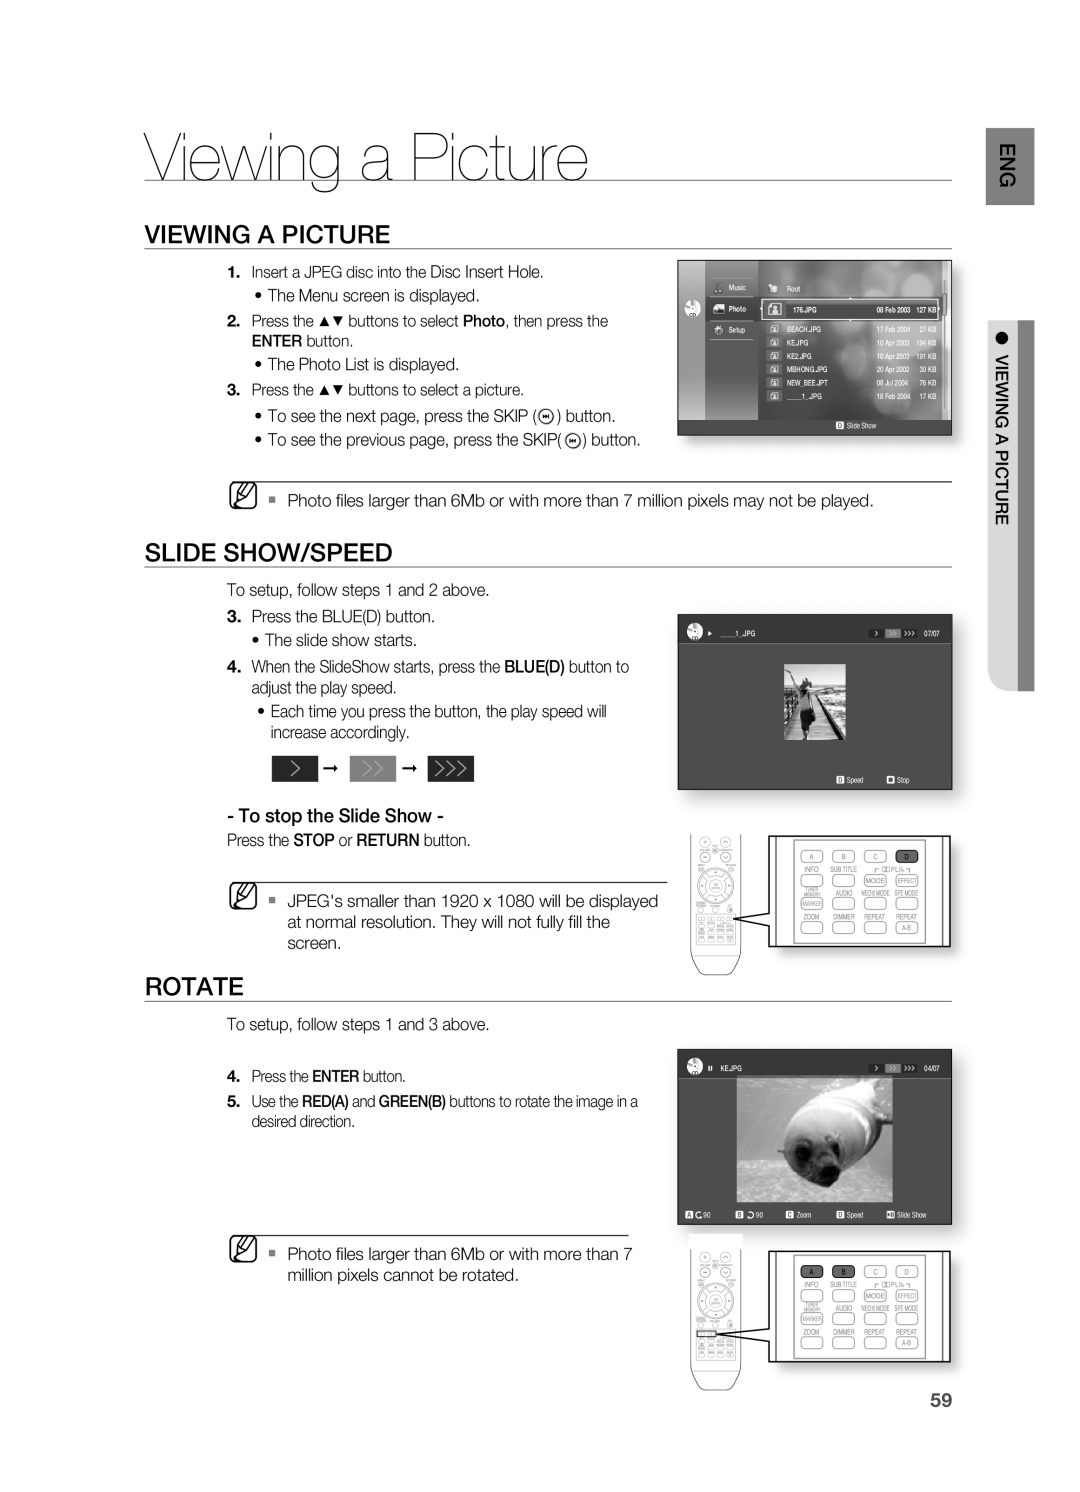 Samsung AH68-02019S manual Viewing a Picture, VIEWIng A PICTURE, Slide Show/Speed, Rotate 